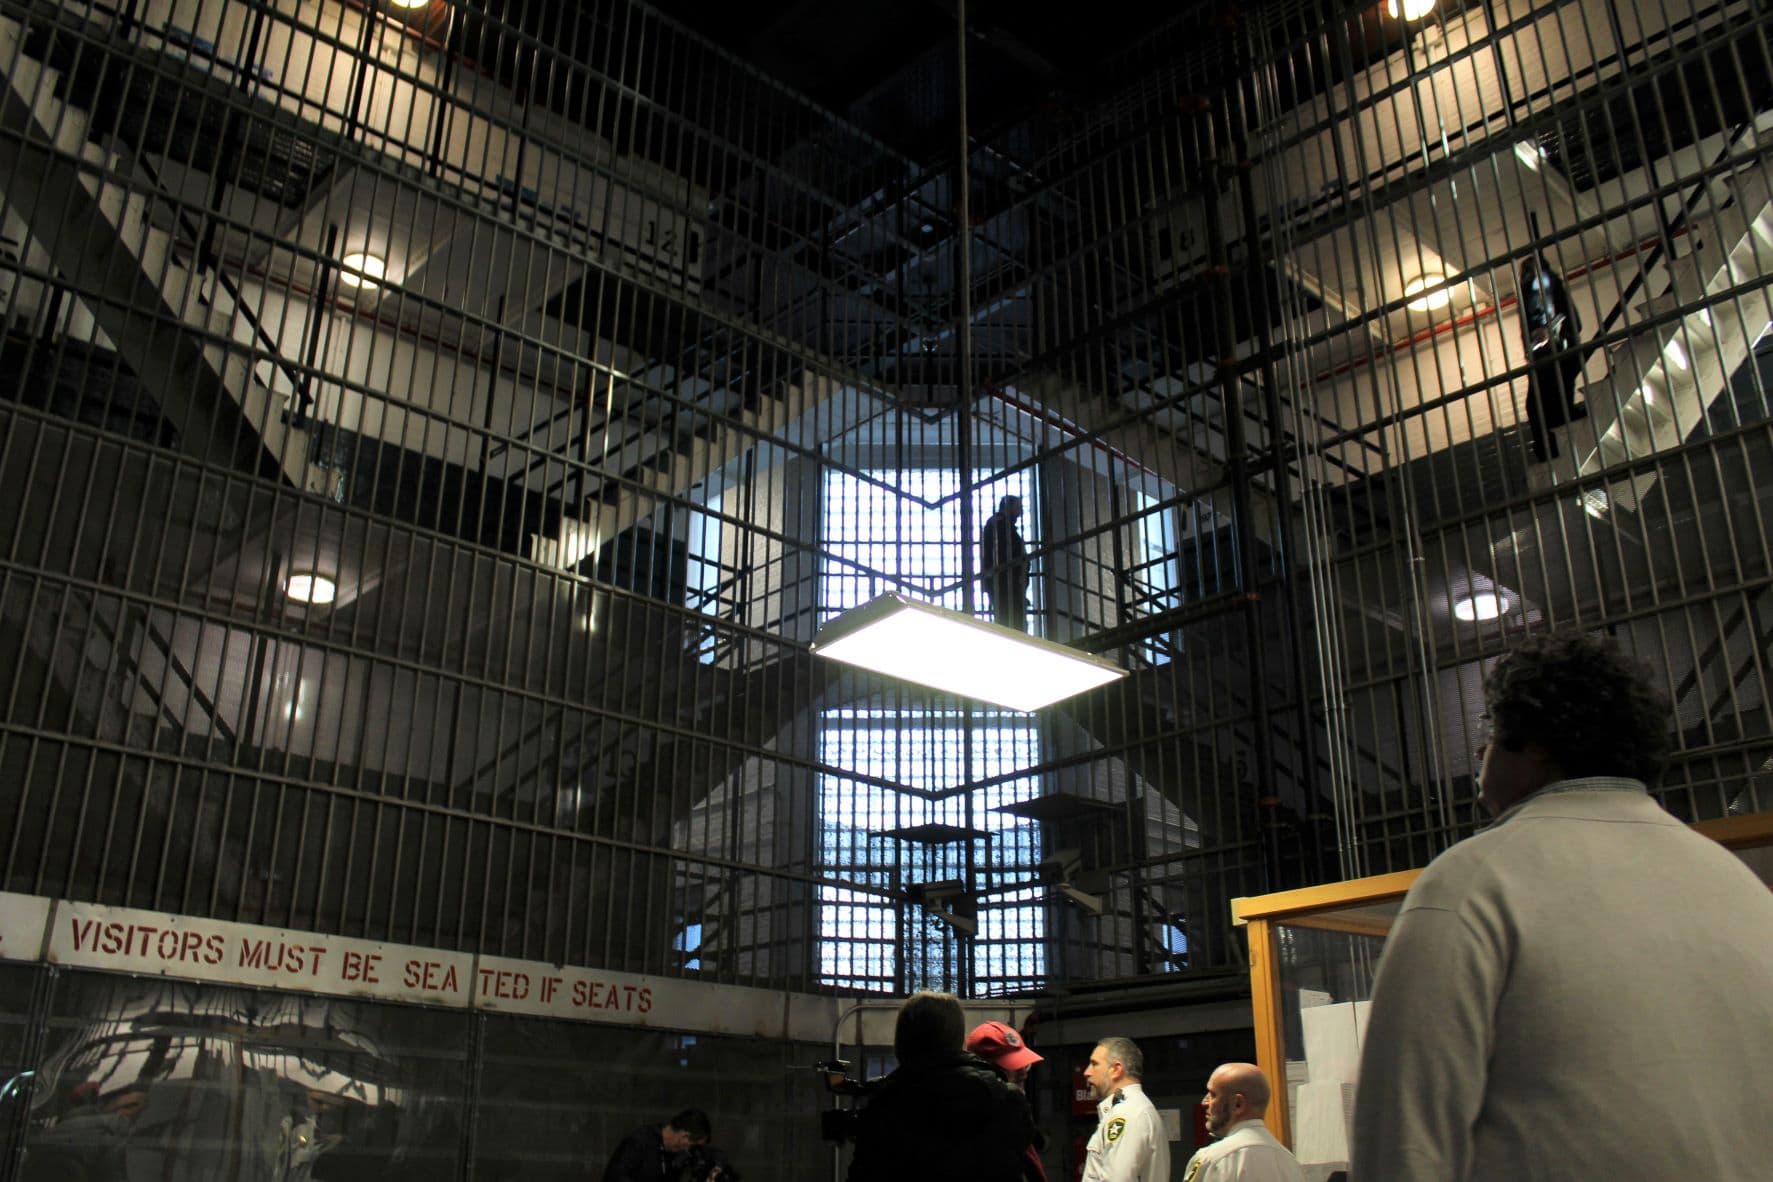 Much of the jail's original infrastructure from 1888 remains in use today. (Ben Berke/The Public's Radio)